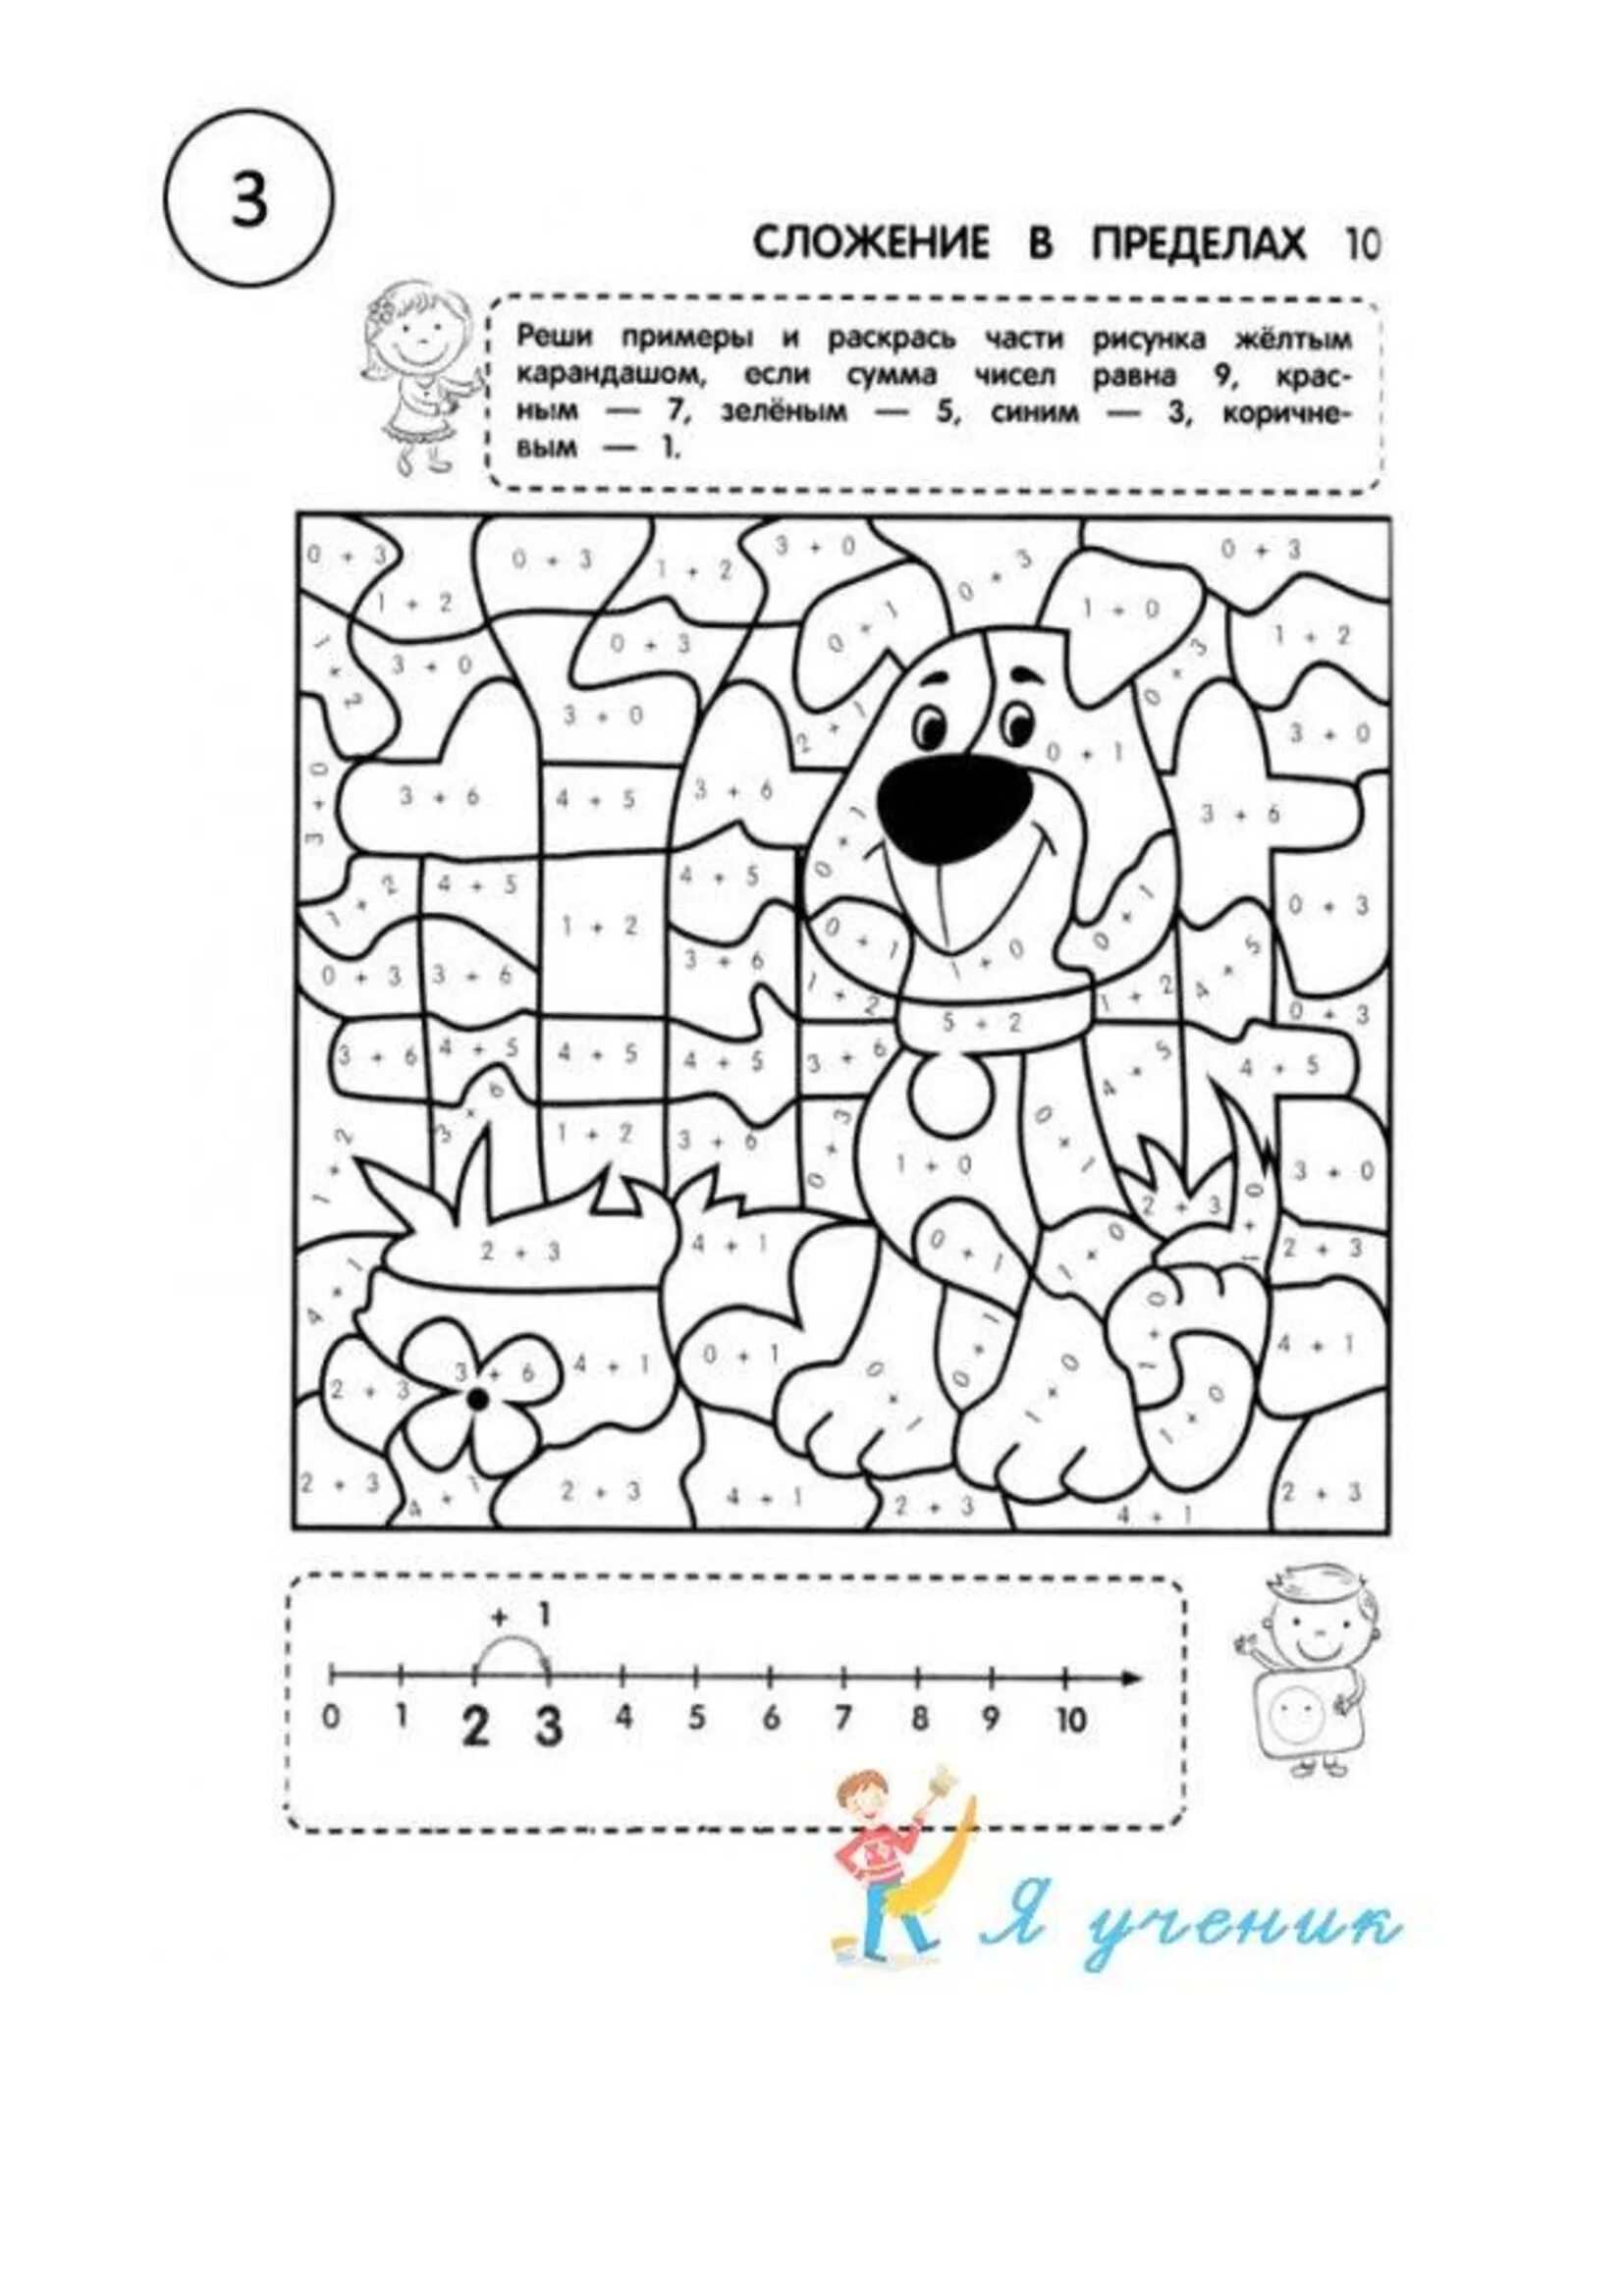 Colorful bright coloring page of 10